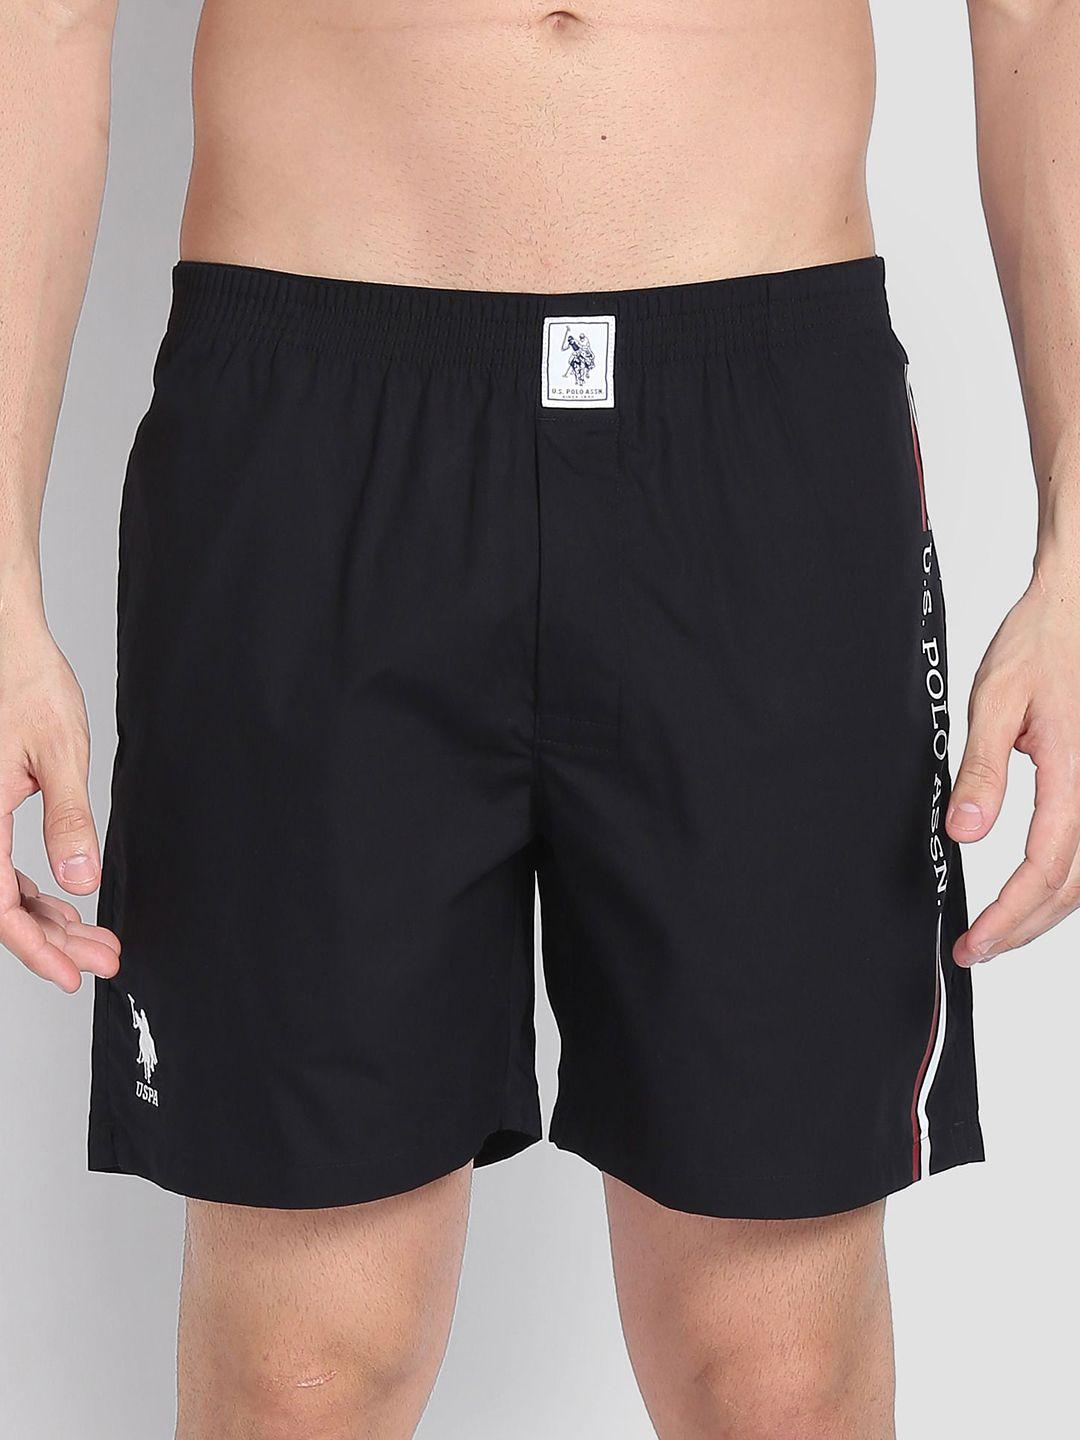 u.s. polo assn. pure cotton boxers iyax-002-pl